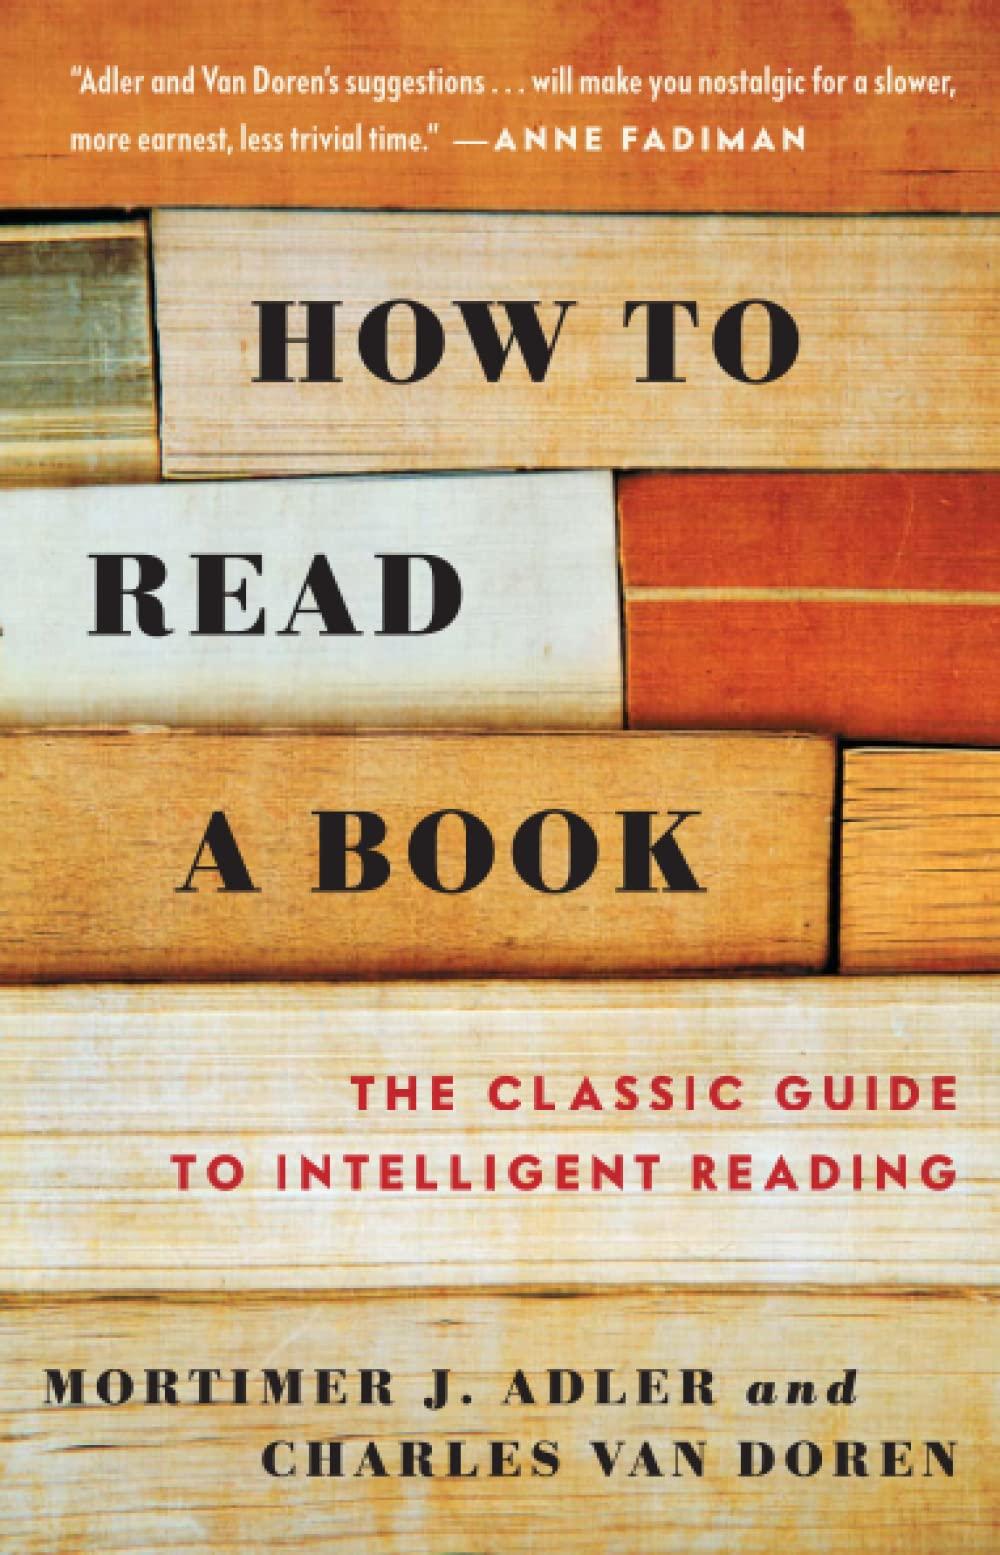 The Ultimate Guide to read a book
by Mortimer Adler